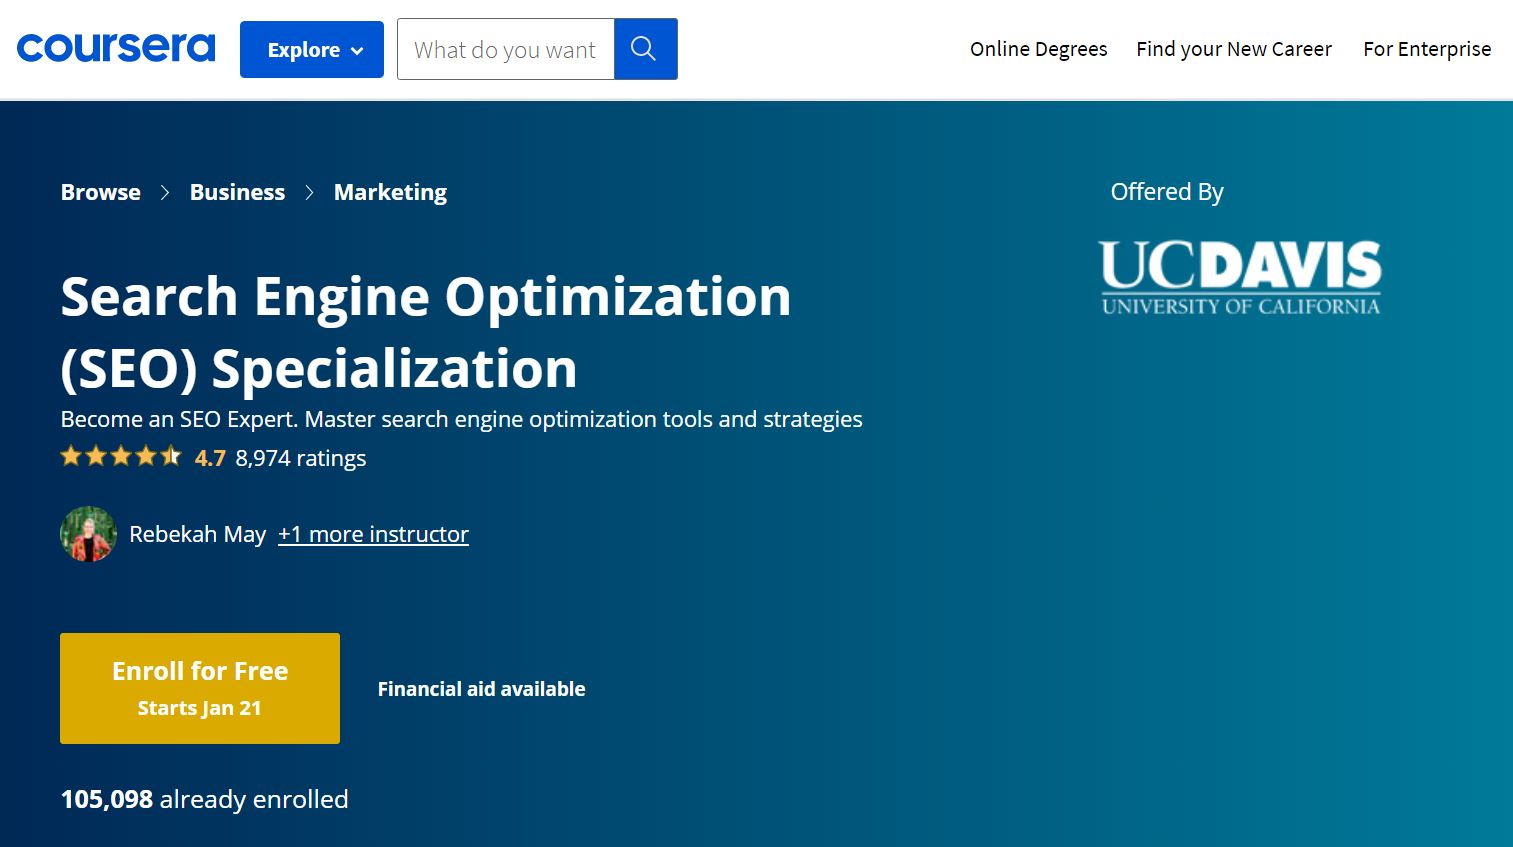 Search Engine Optimization Specialization by the University of California on Coursera